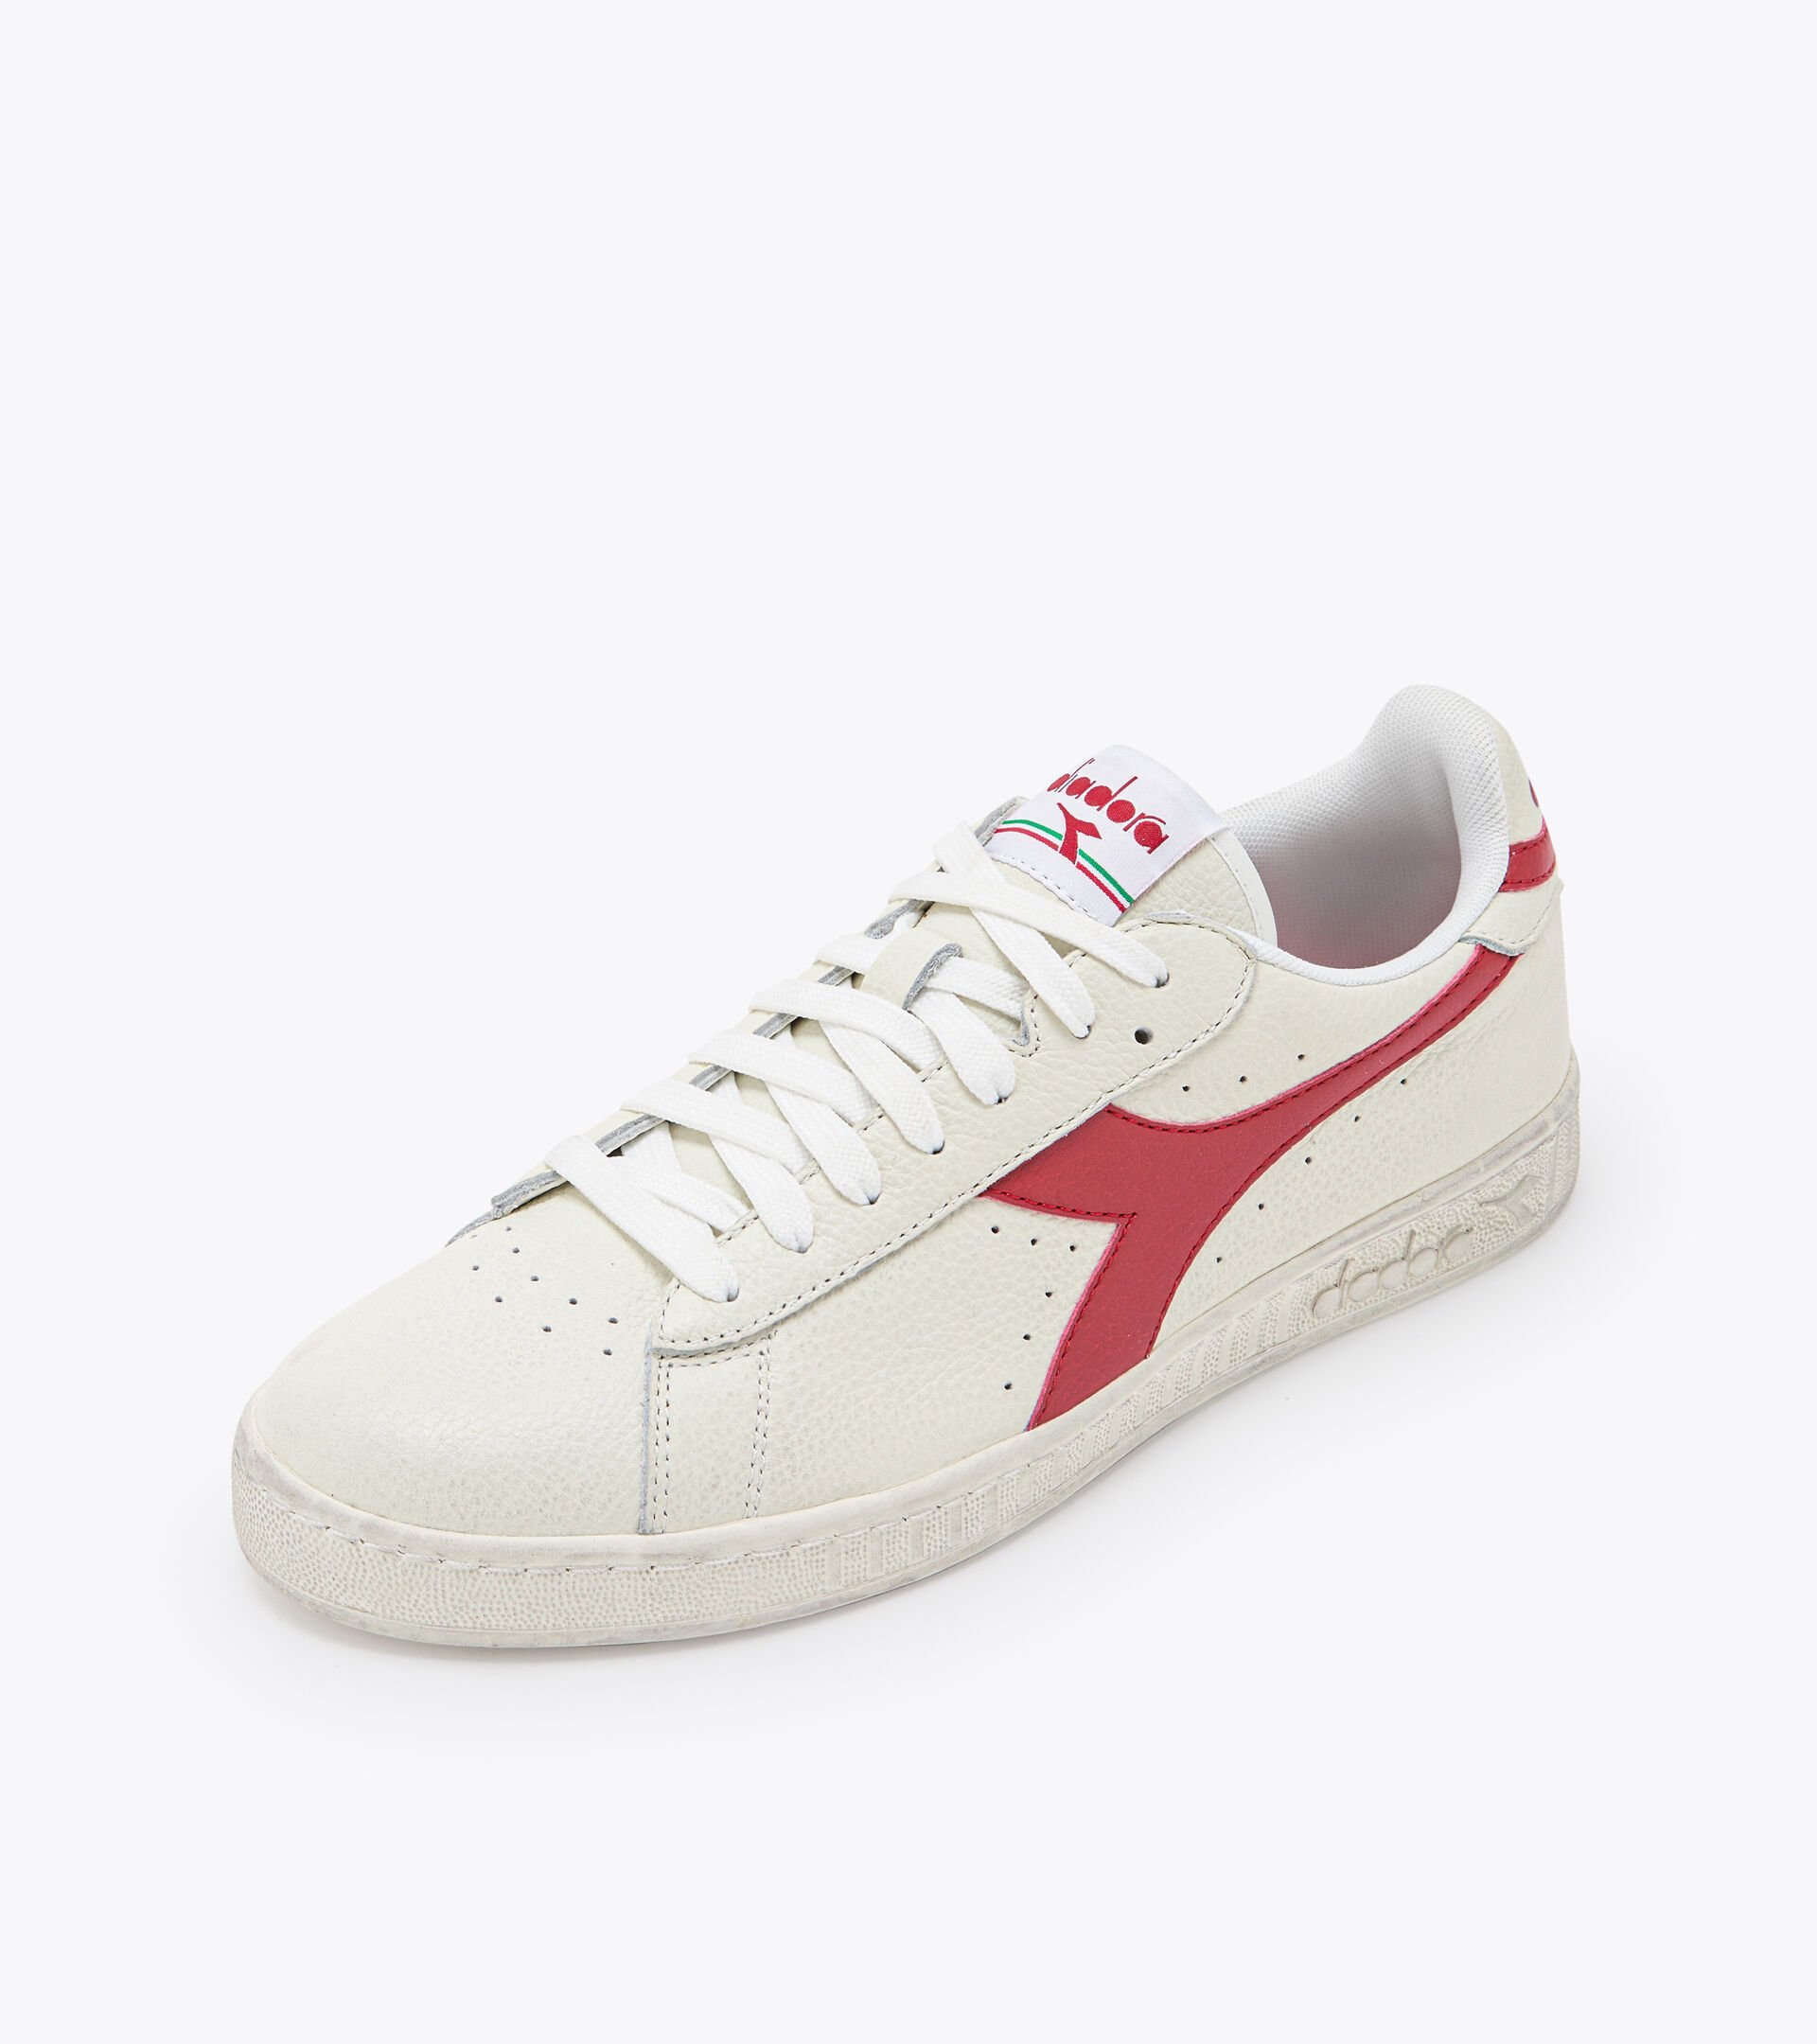 Sneaker sportiva - Gender Neutral GAME L LOW WAXED BIANCO/ROSSO PEPERONE - Diadora